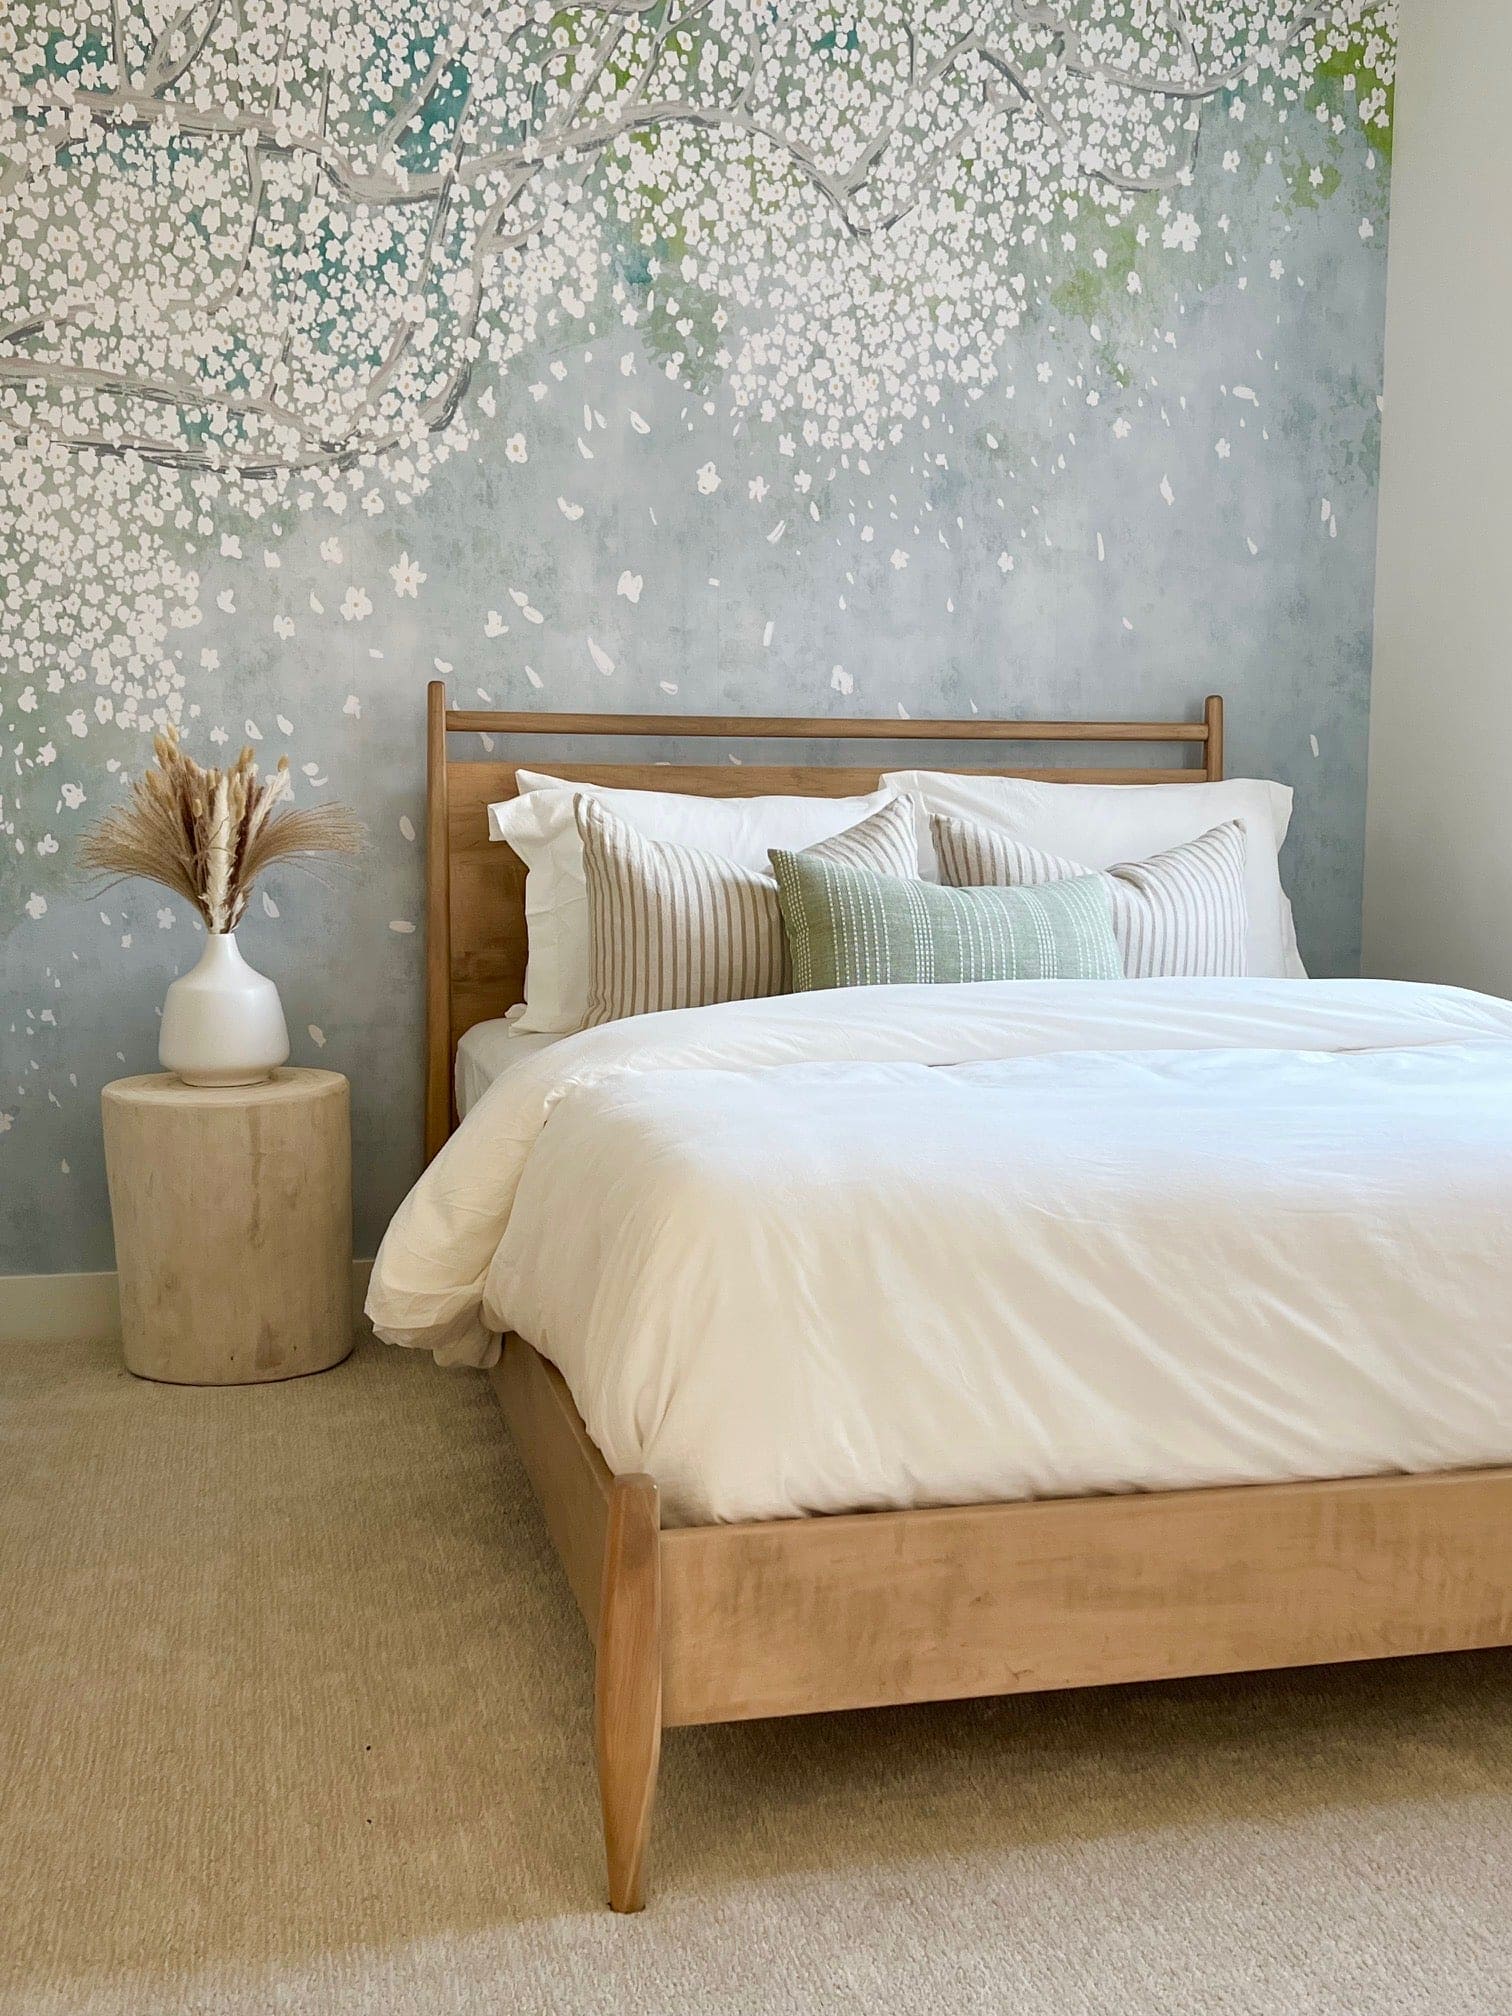 A peaceful bedroom showcasing the cherry blossom mural as a headboard, complemented by soft bedding and neutral decor. The wallpaper's delicate flowers and branches convey a restful ambiance.